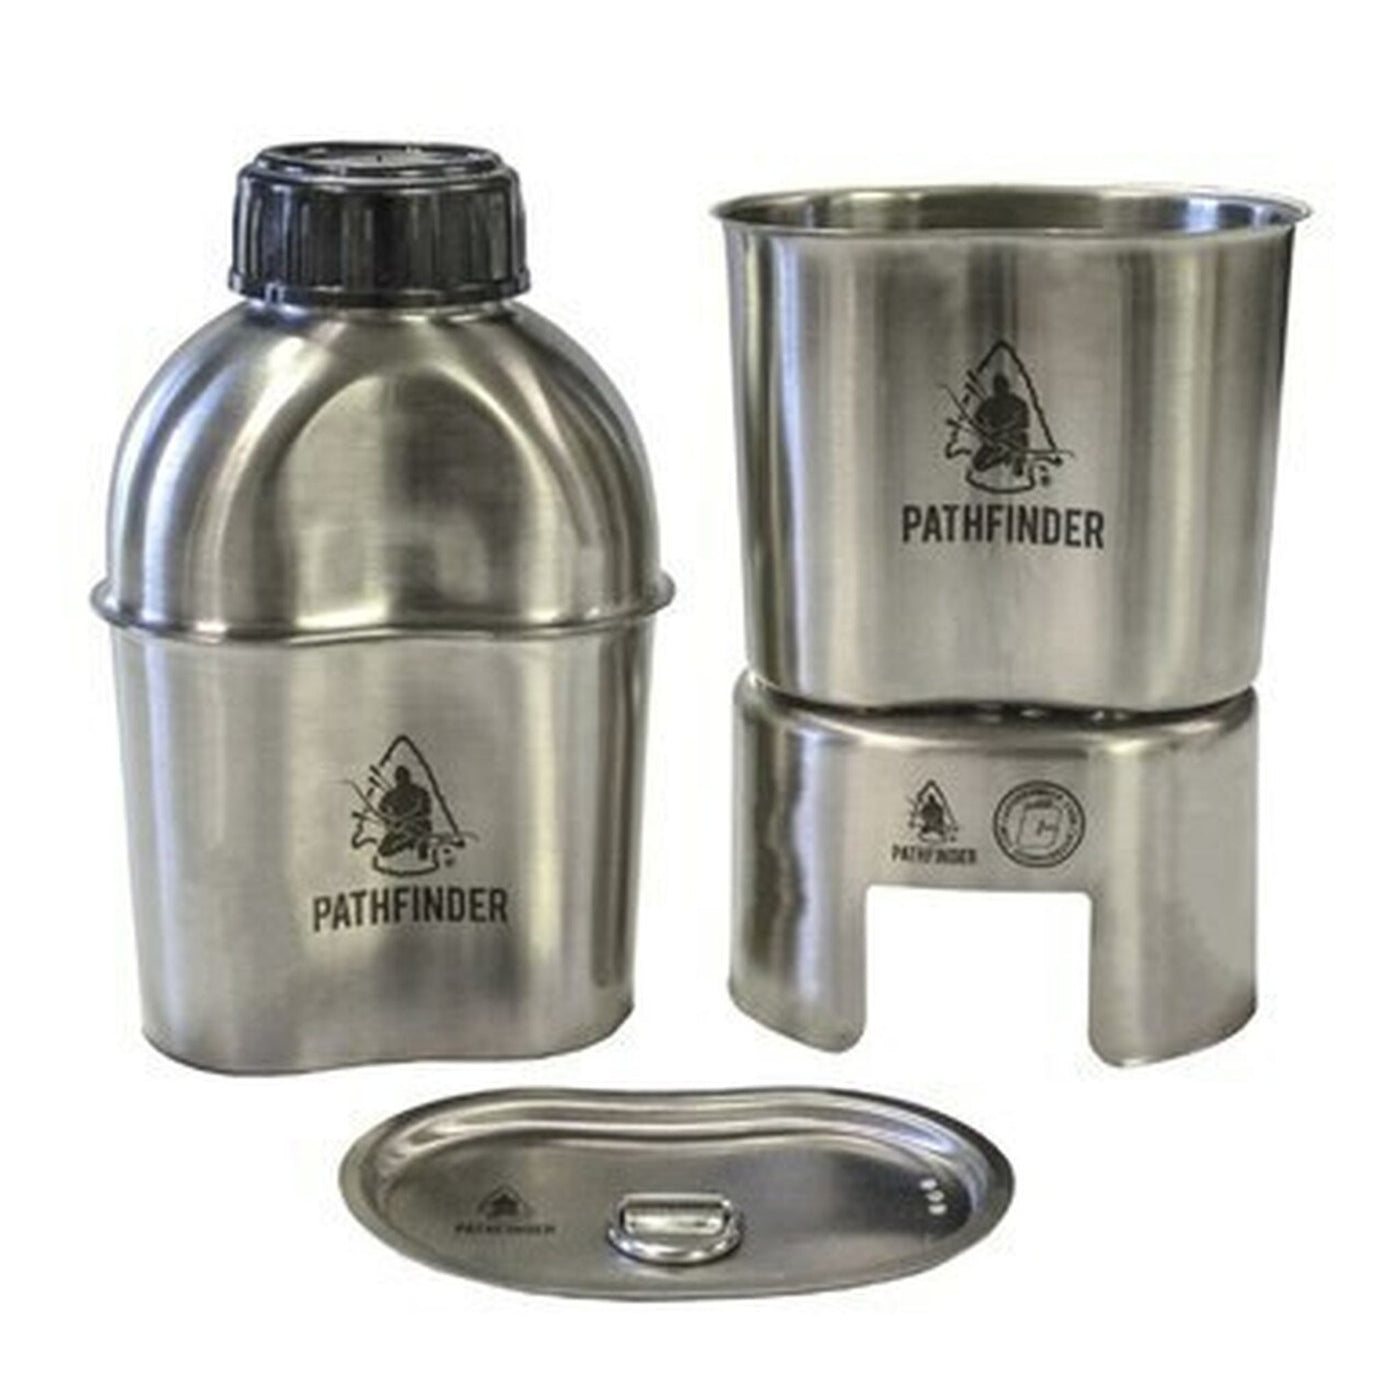 The Pathfinder School Stainless Steel Bottle Cooking Kit